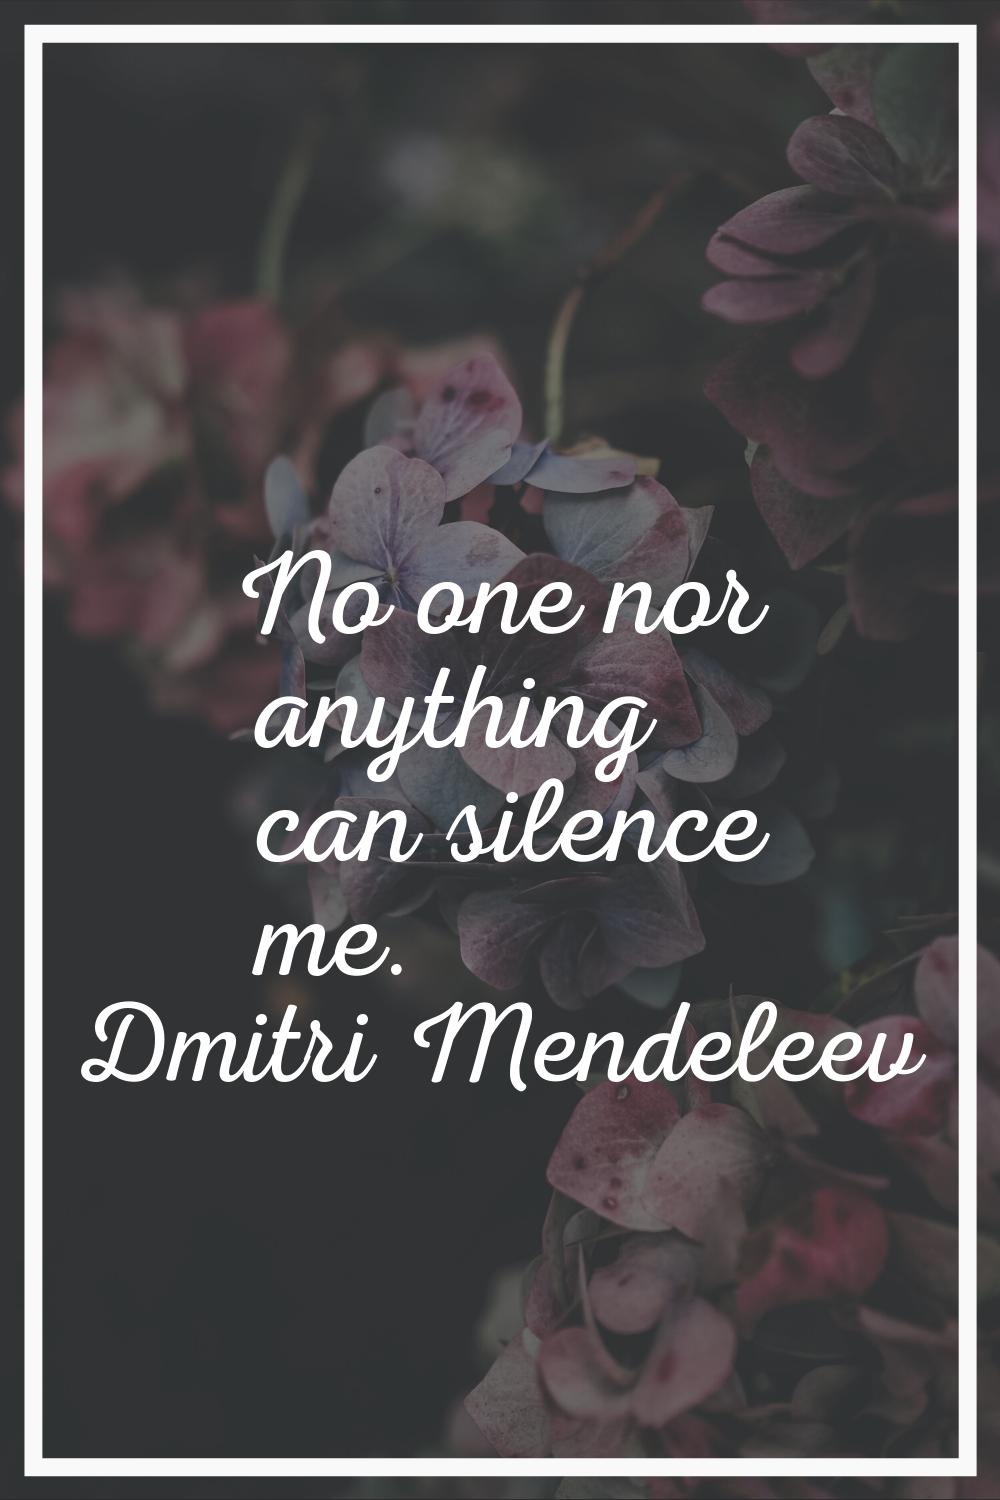 No one nor anything can silence me.